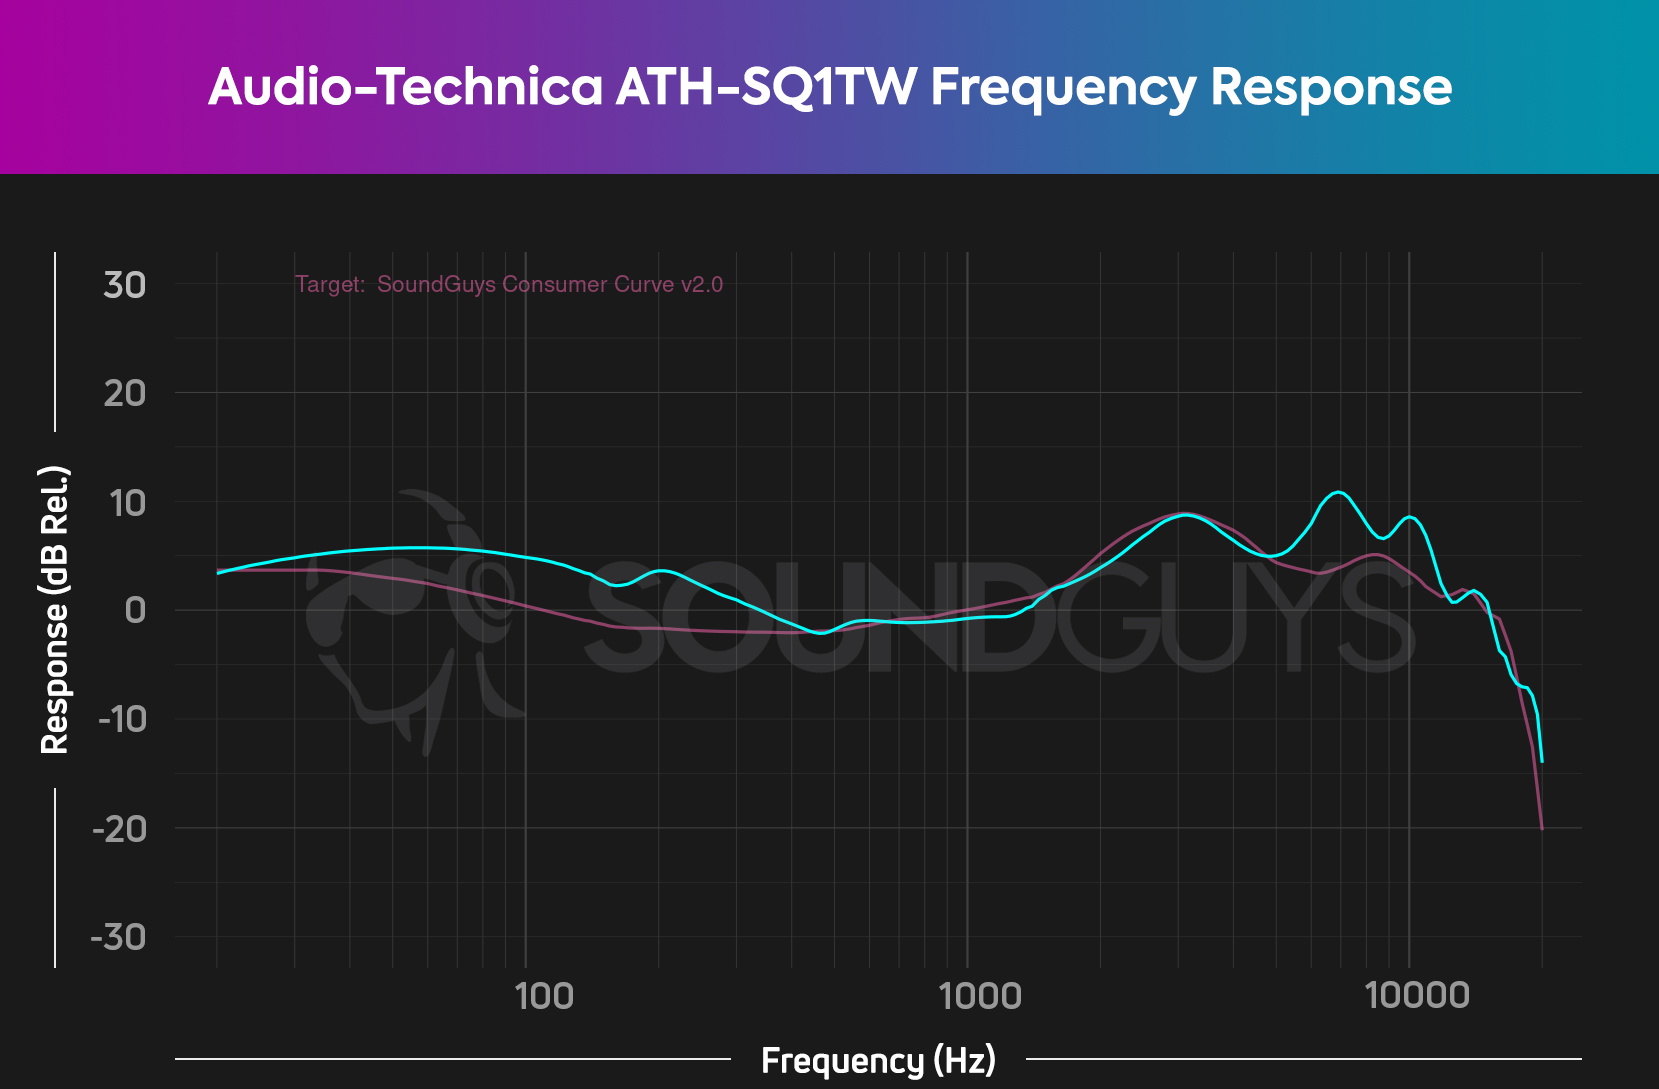 A frequency response chart for the Audio-Technica ATH-SQ1TW true wireless earbuds, which shows very accurate frequency response.